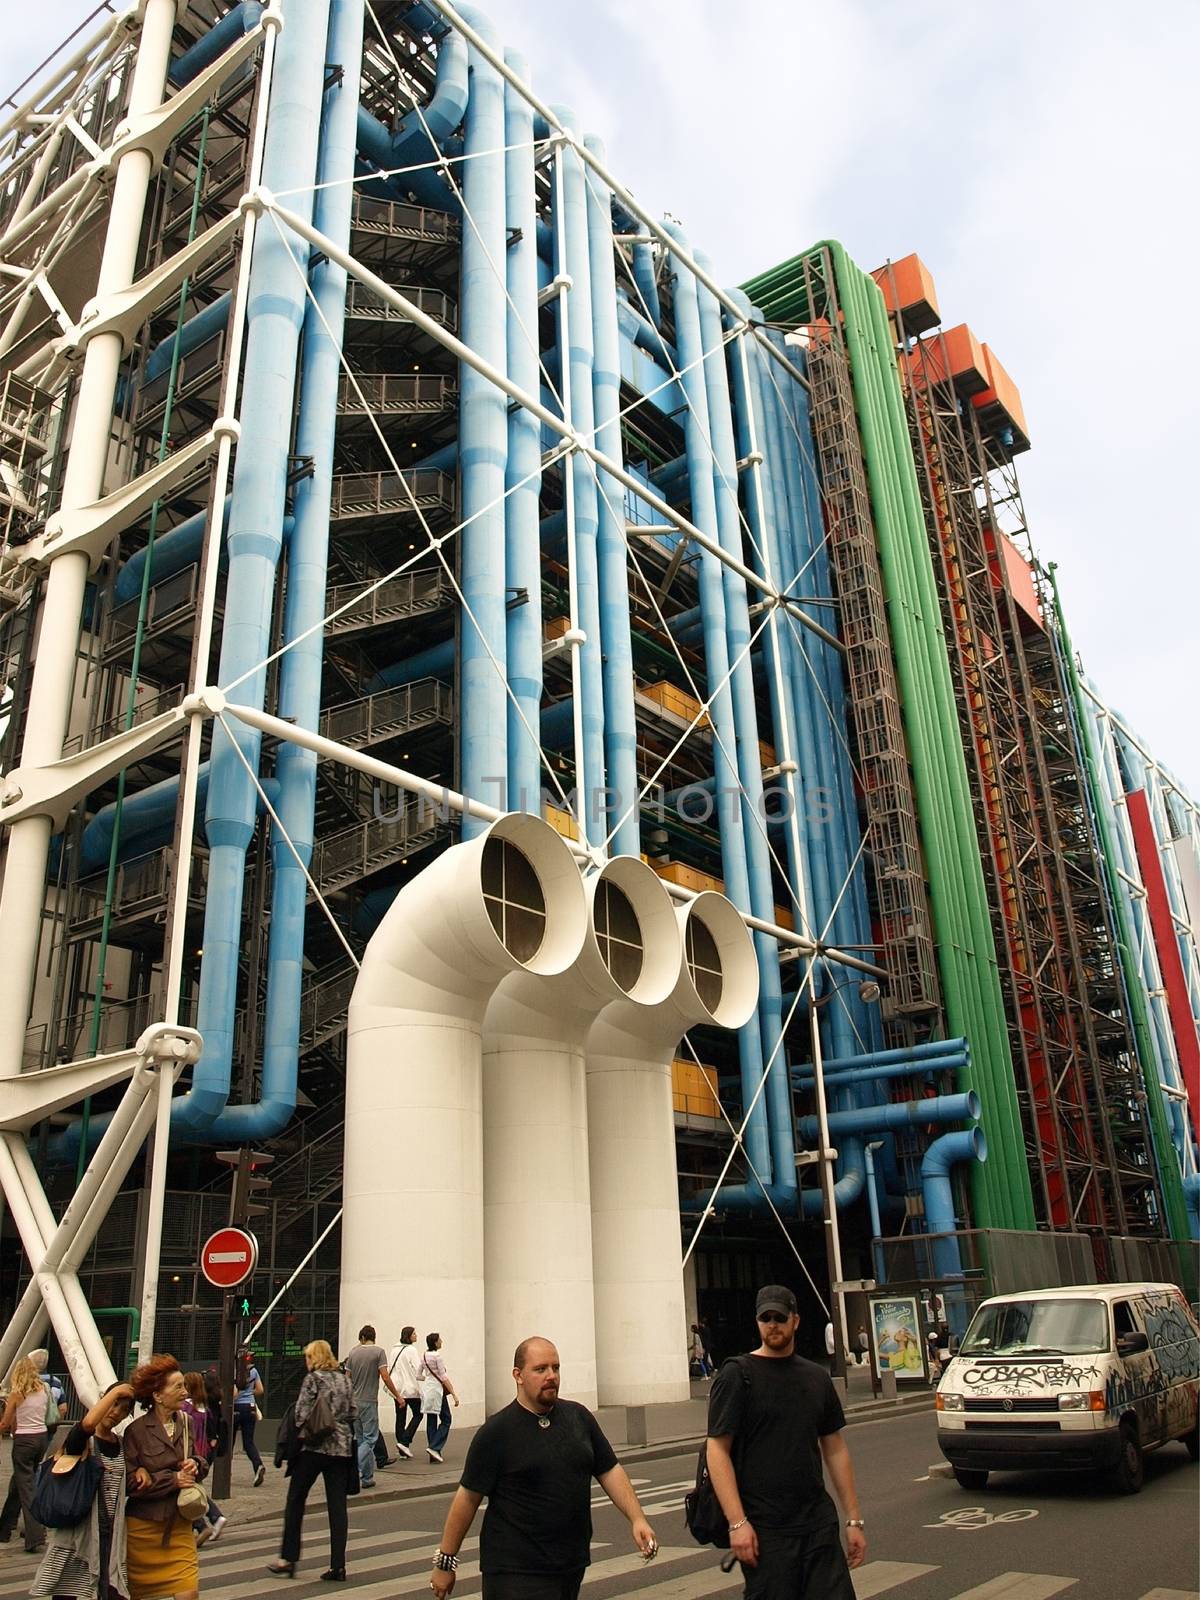 PARIS FRANCE - JULY 25: The exposed HVAC system on the Centre Georges Pompidou, the Centre was designed by the Italian architect Renzo Piano in 1977 July 25, 2009 in Paris, France.